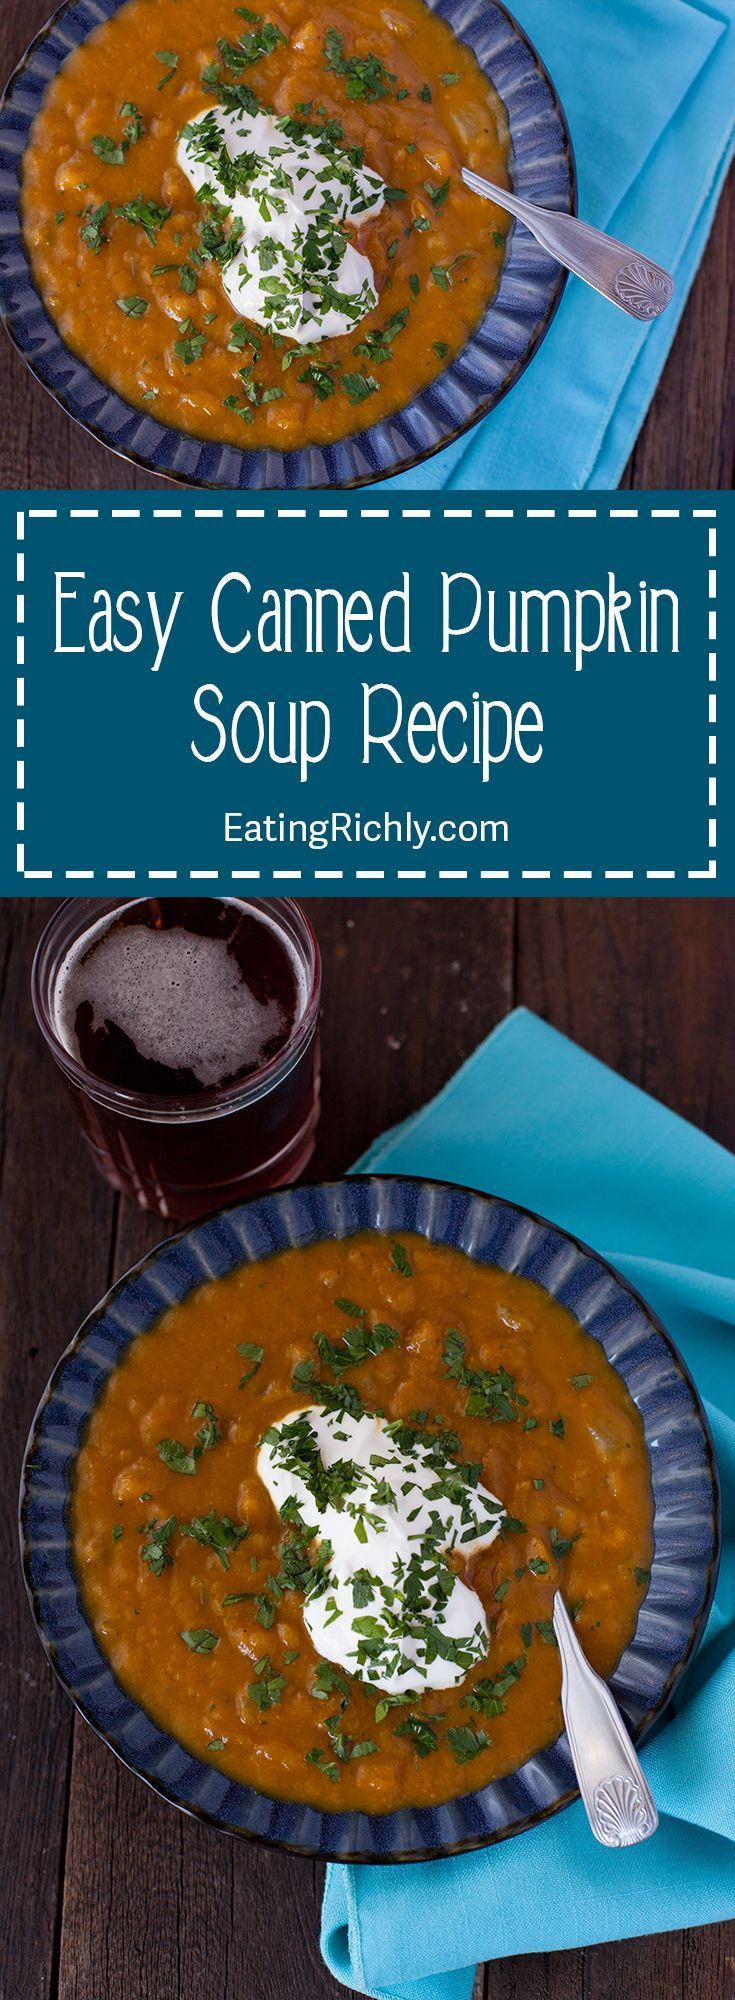 Healthy Canned Pumpkin Recipes
 This easy pumpkin soup recipe with canned pumpkin doesn t